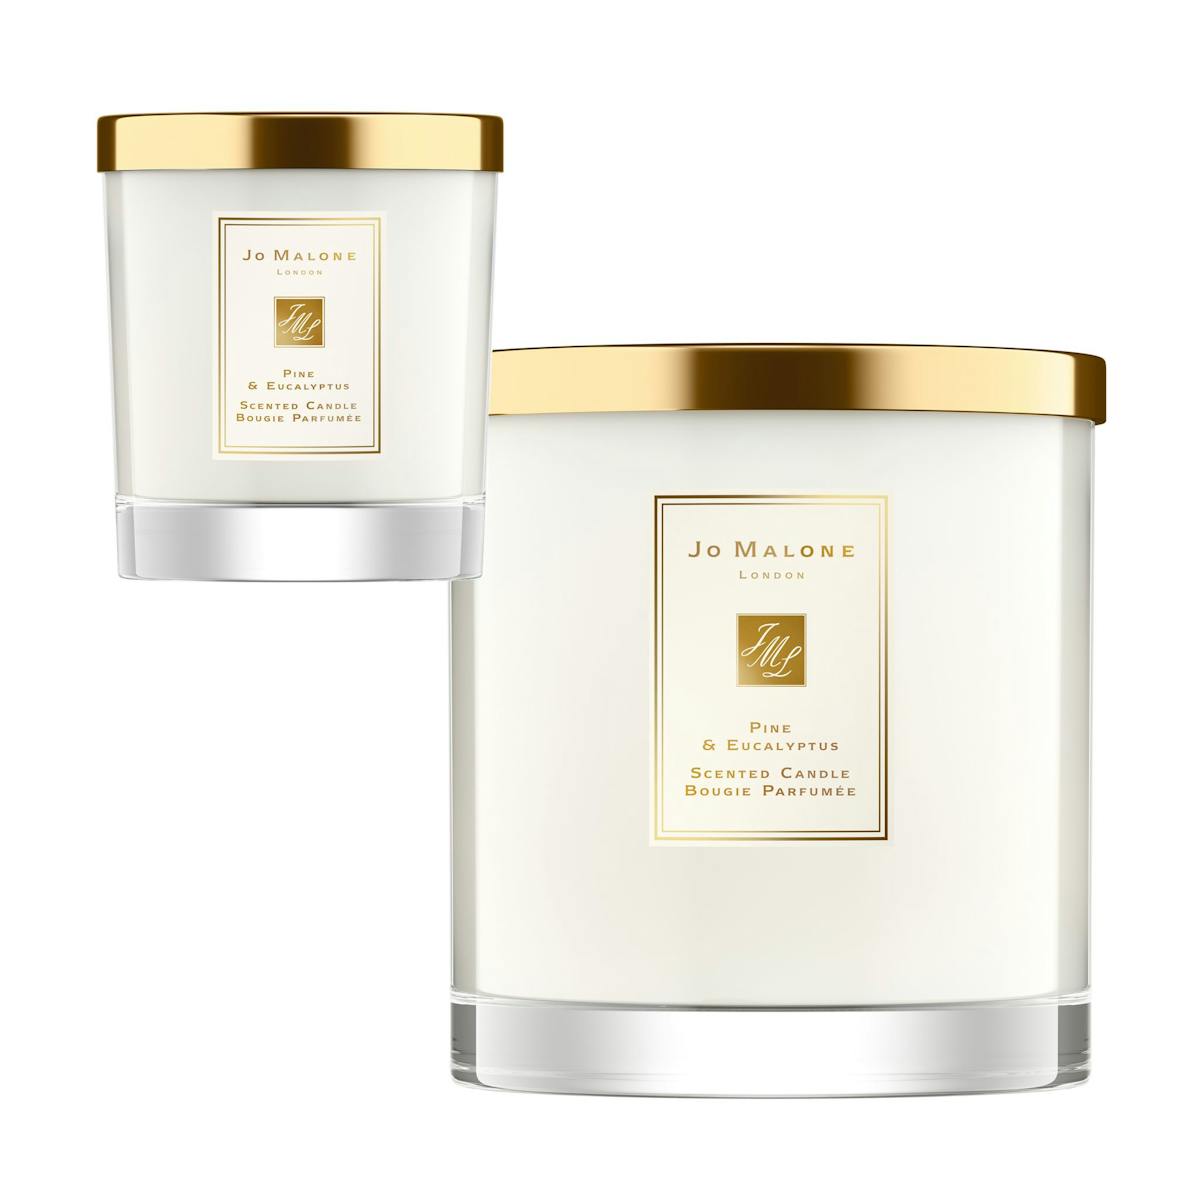 Jo Malone 2019 Christmas Collection: Cracker, candles and perfume